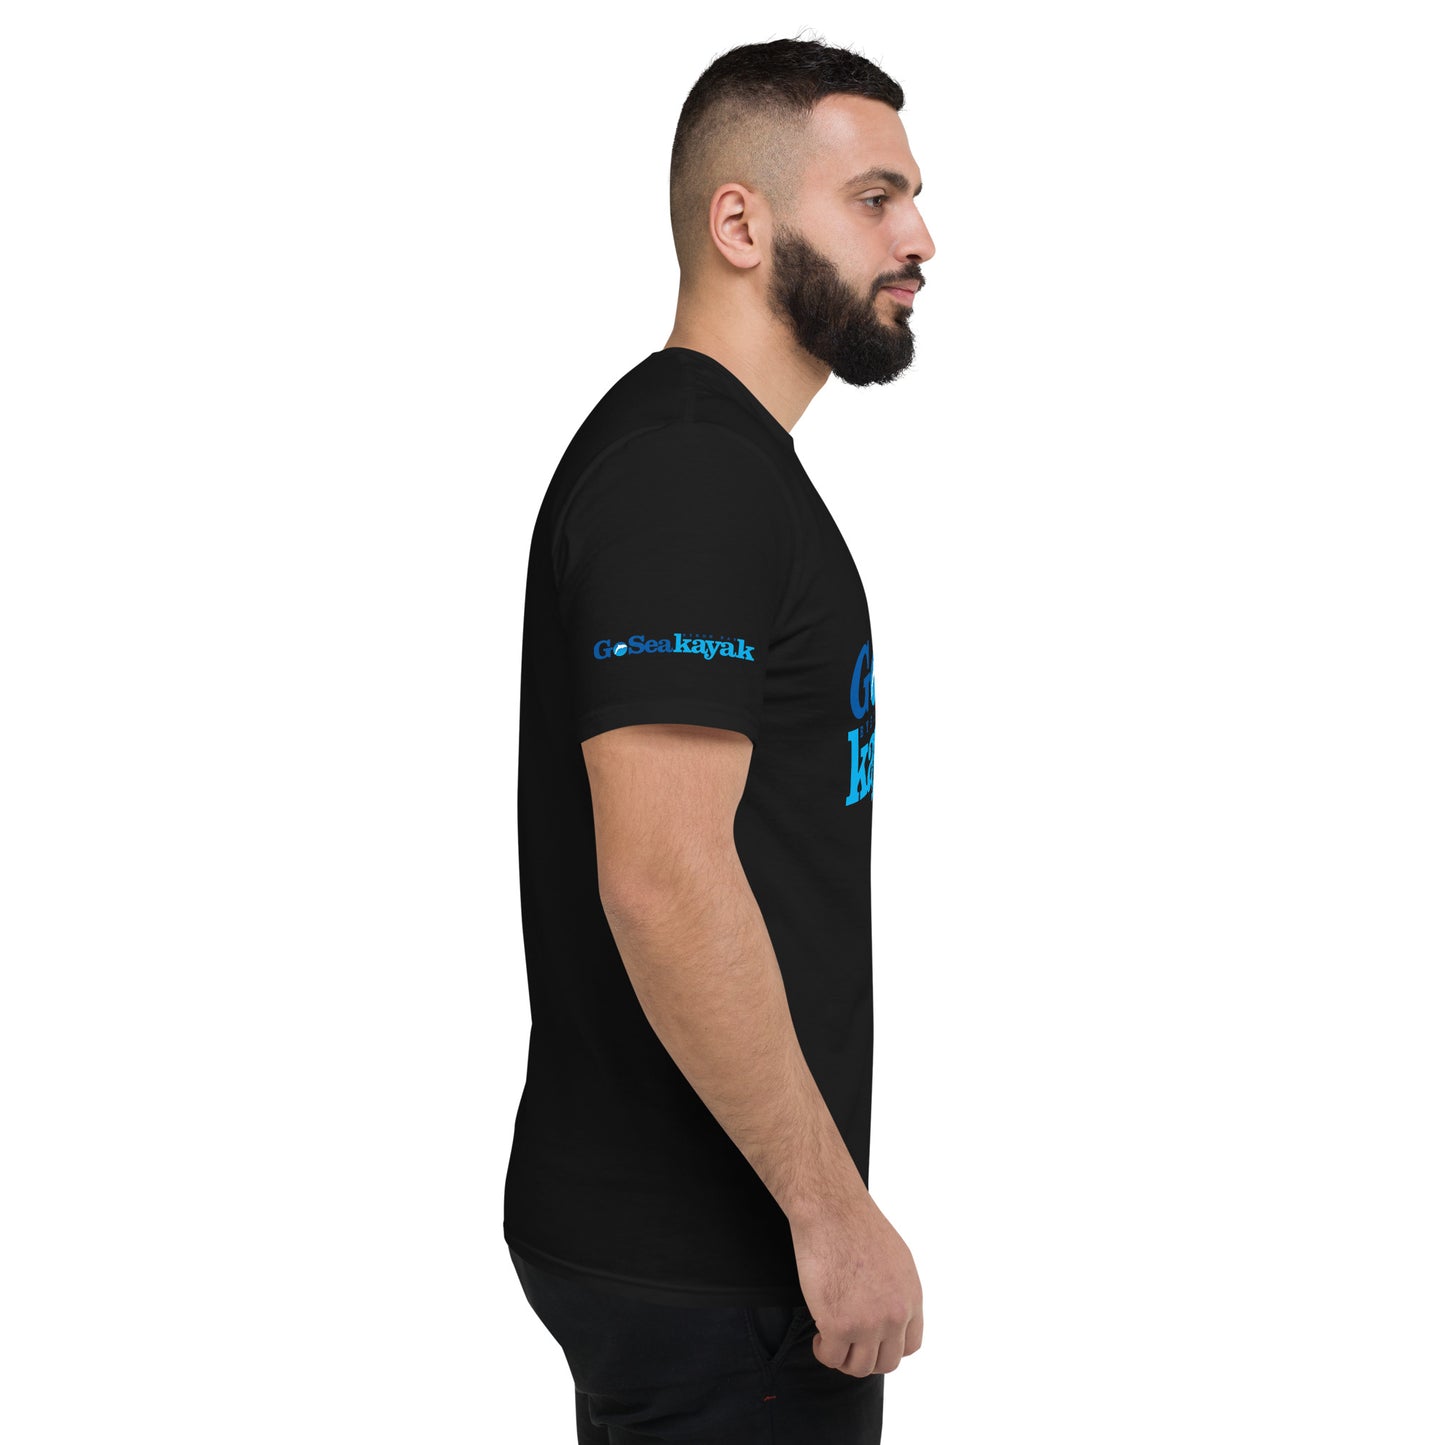  Unisex short sleeve T-shirt - Black - Side view on man - With Go Sea Kayak logo on front and right sleve - Genuine Go Sea Kayak Byron Bay Merchandise 